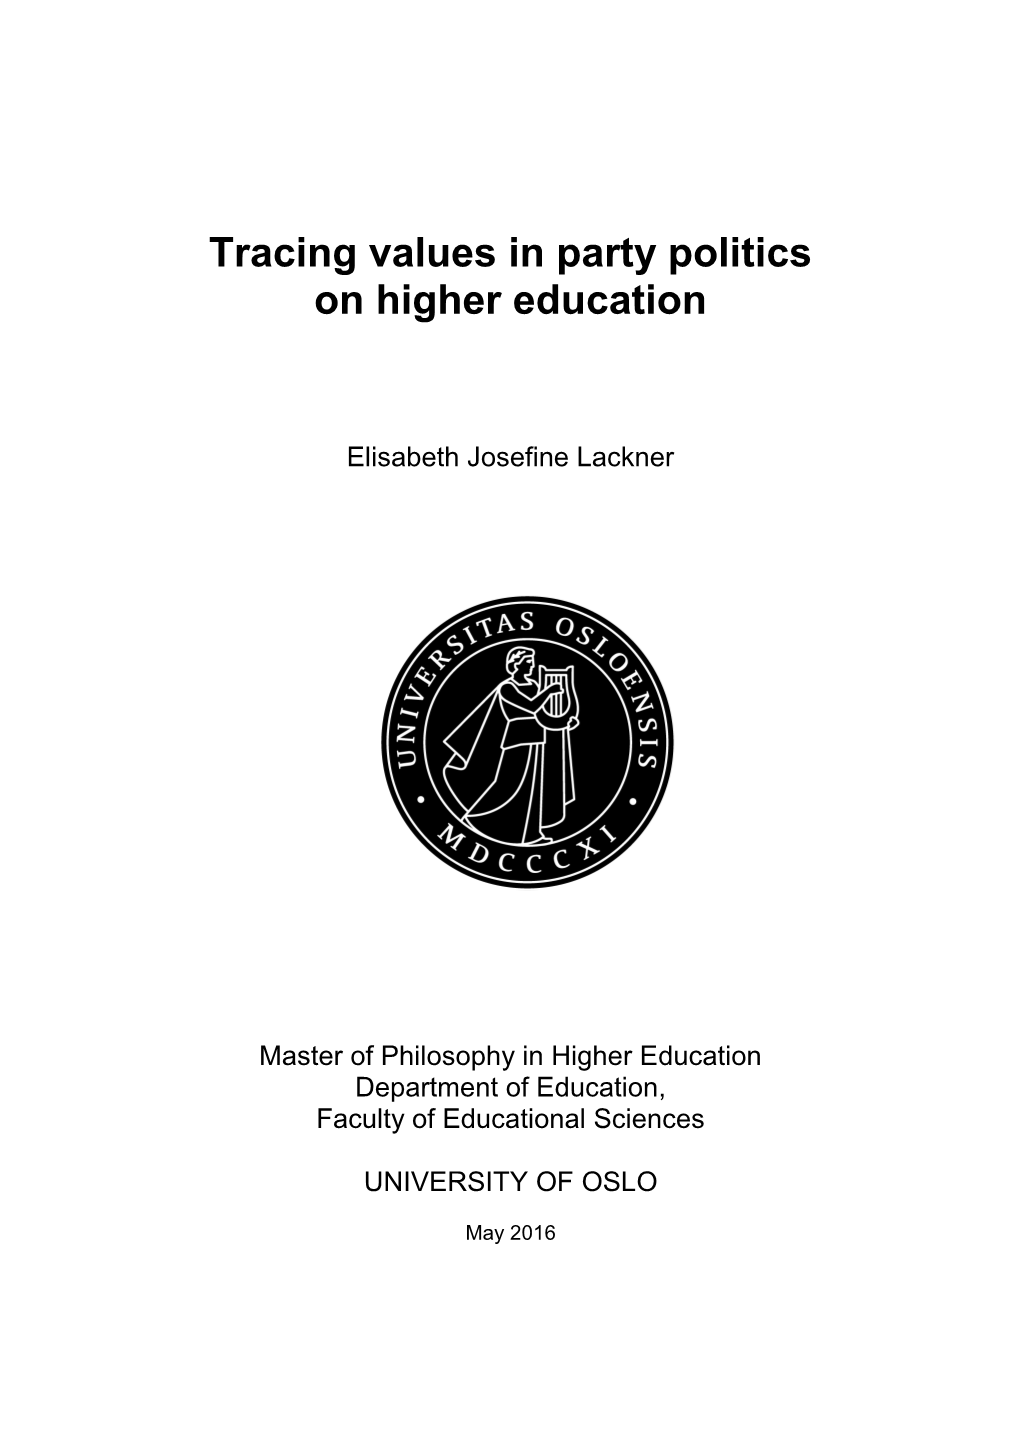 Tracing Values in Party Politics on Higher Education